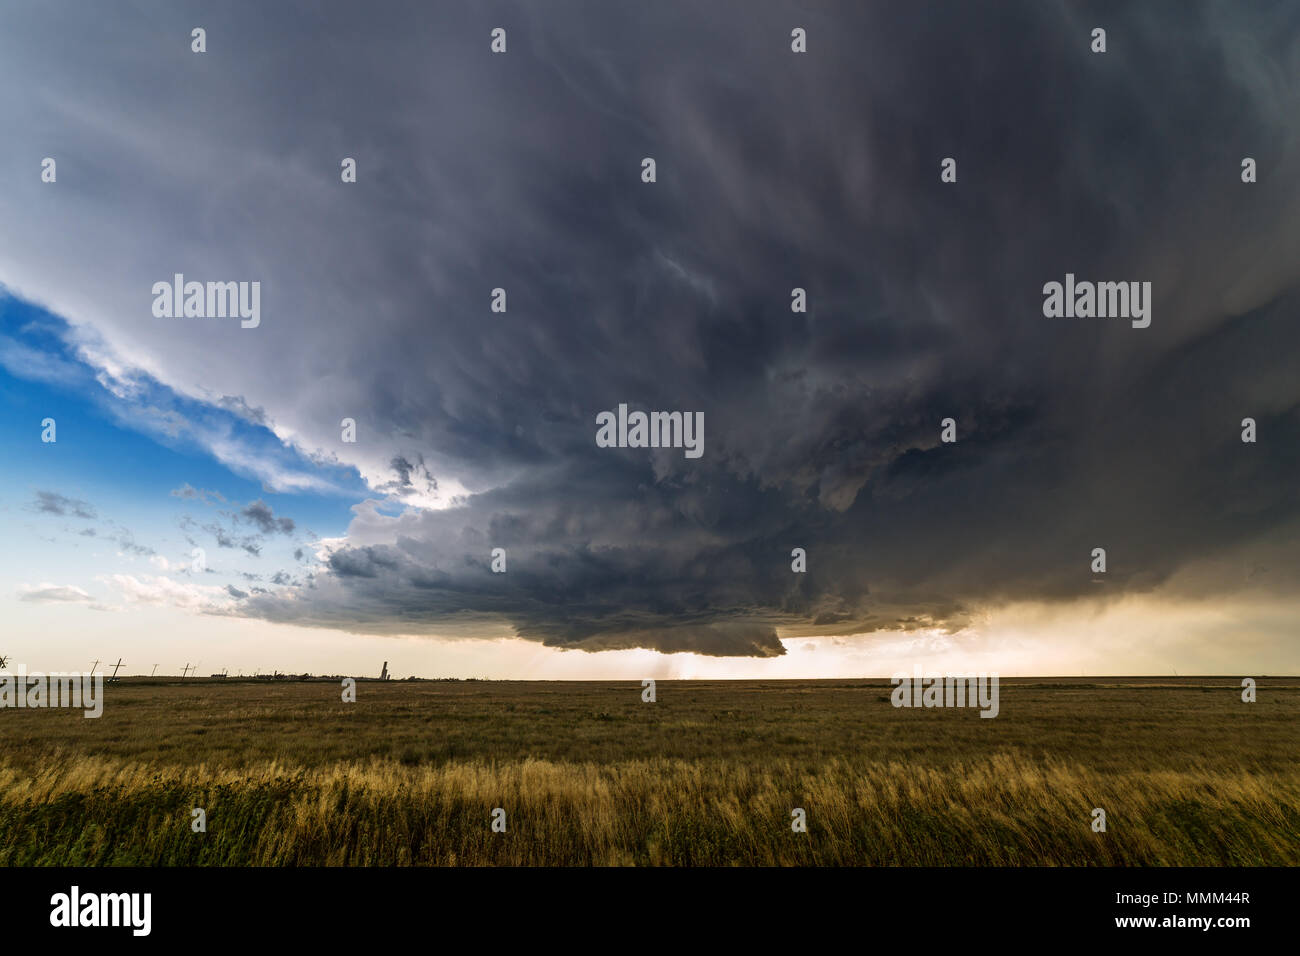 A dark, dramatic wall cloud and supercell thunderstorm in the plains in Colorado Stock Photo